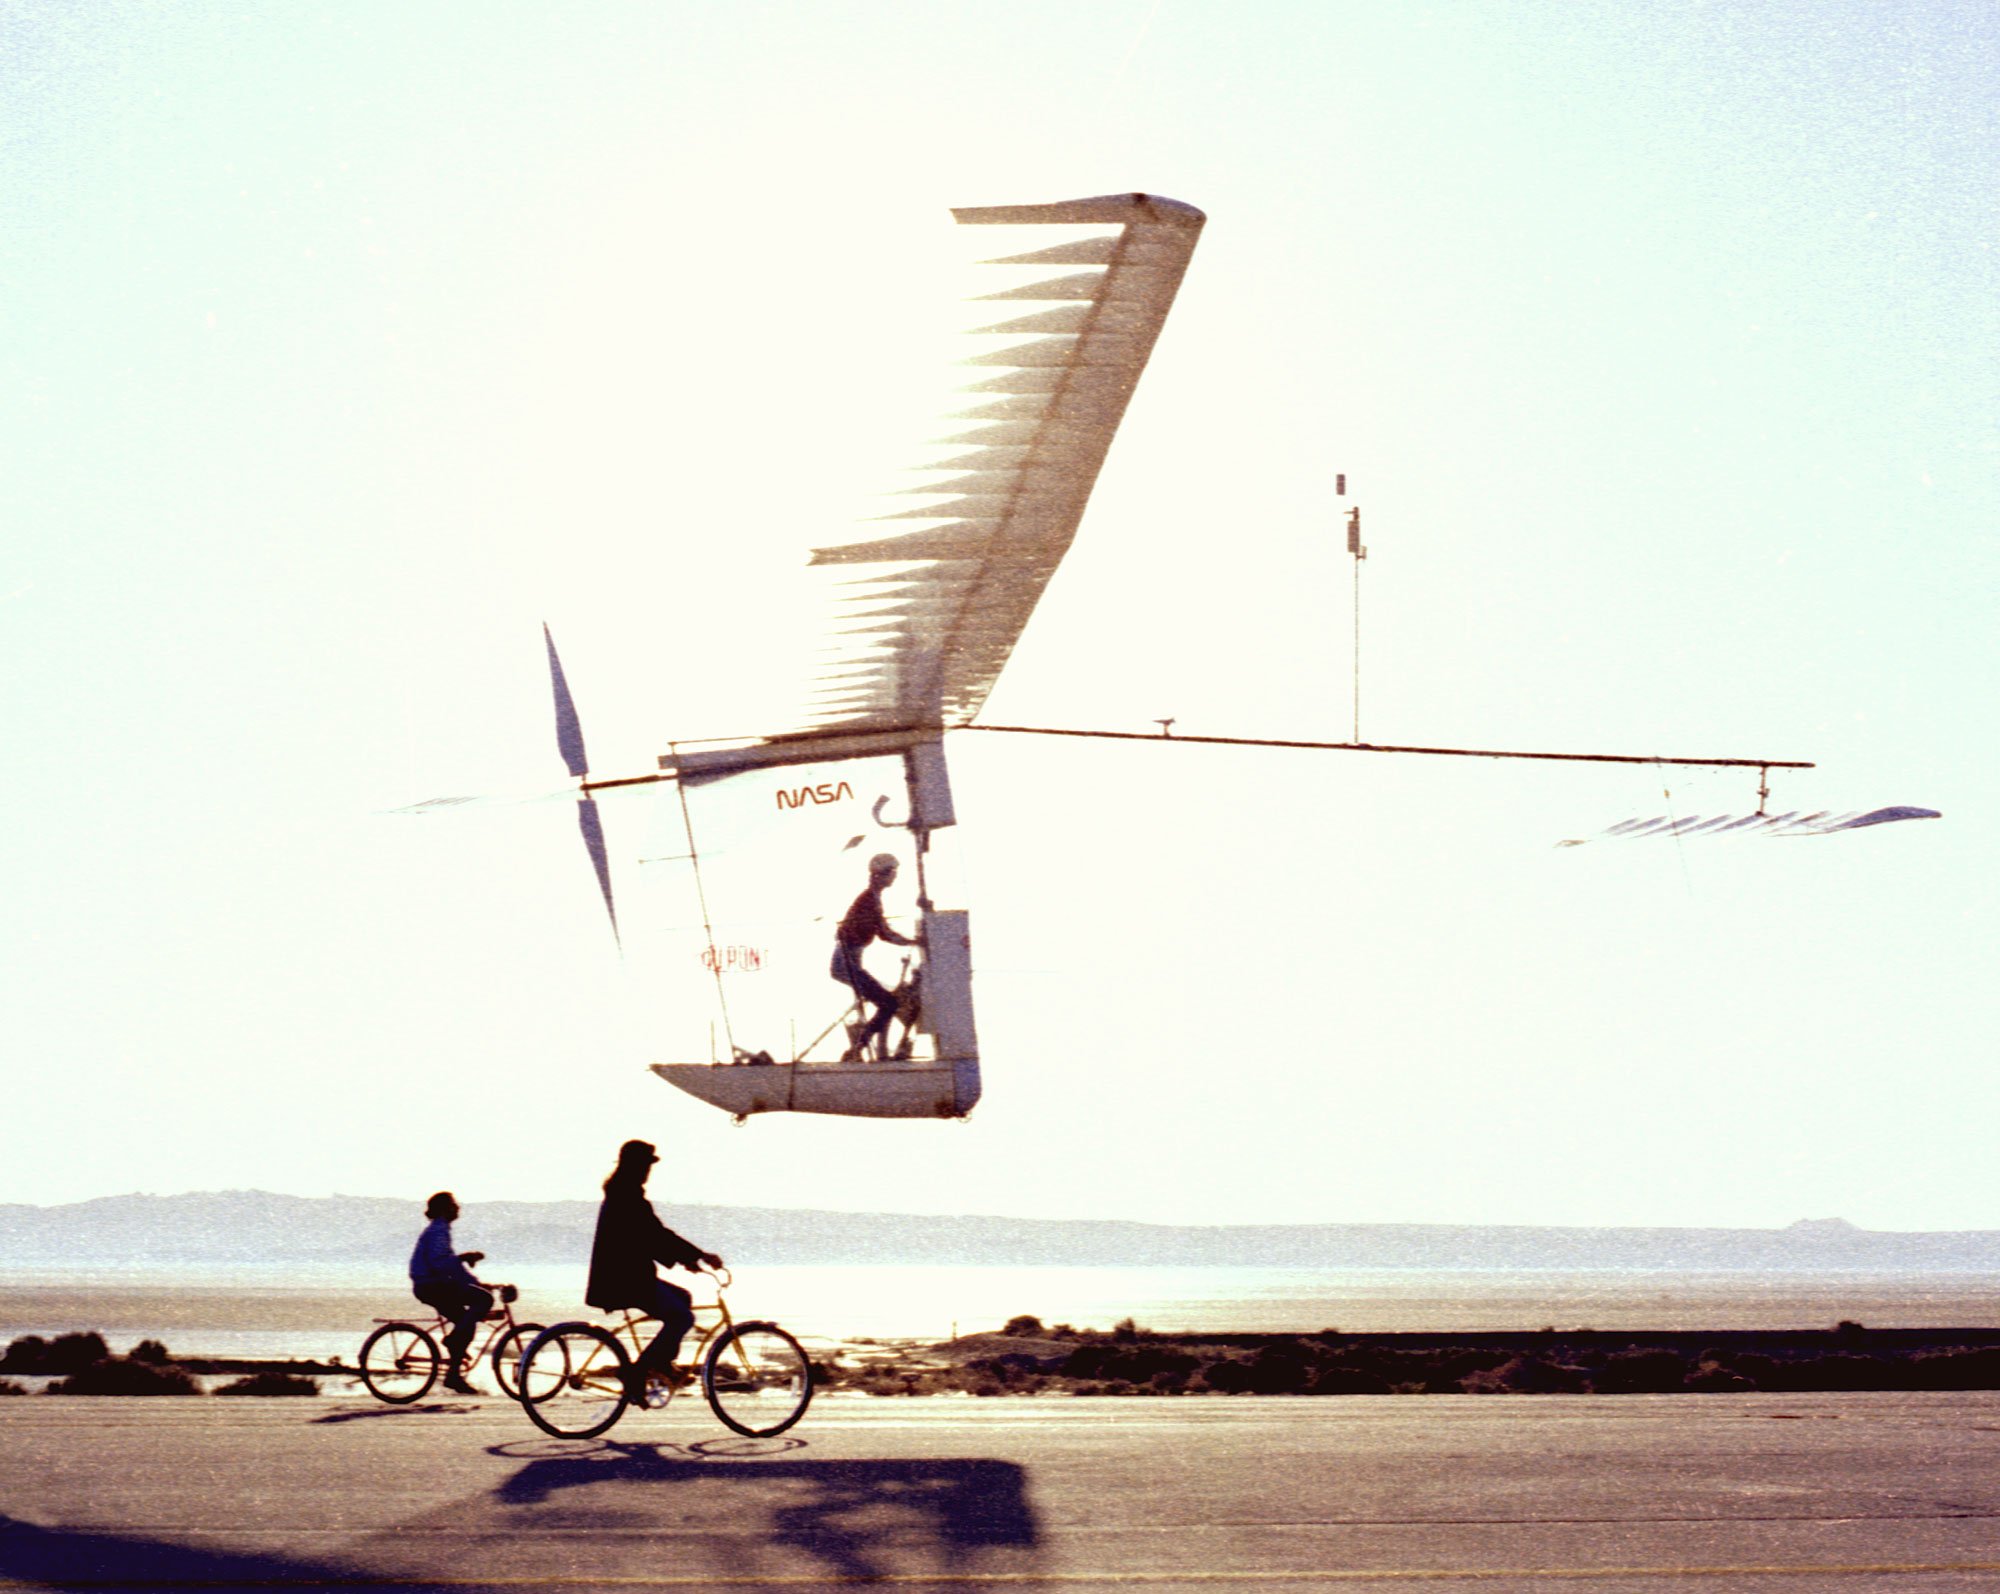 Gossamer Albatross in flight, with two bicycles following it on the ground